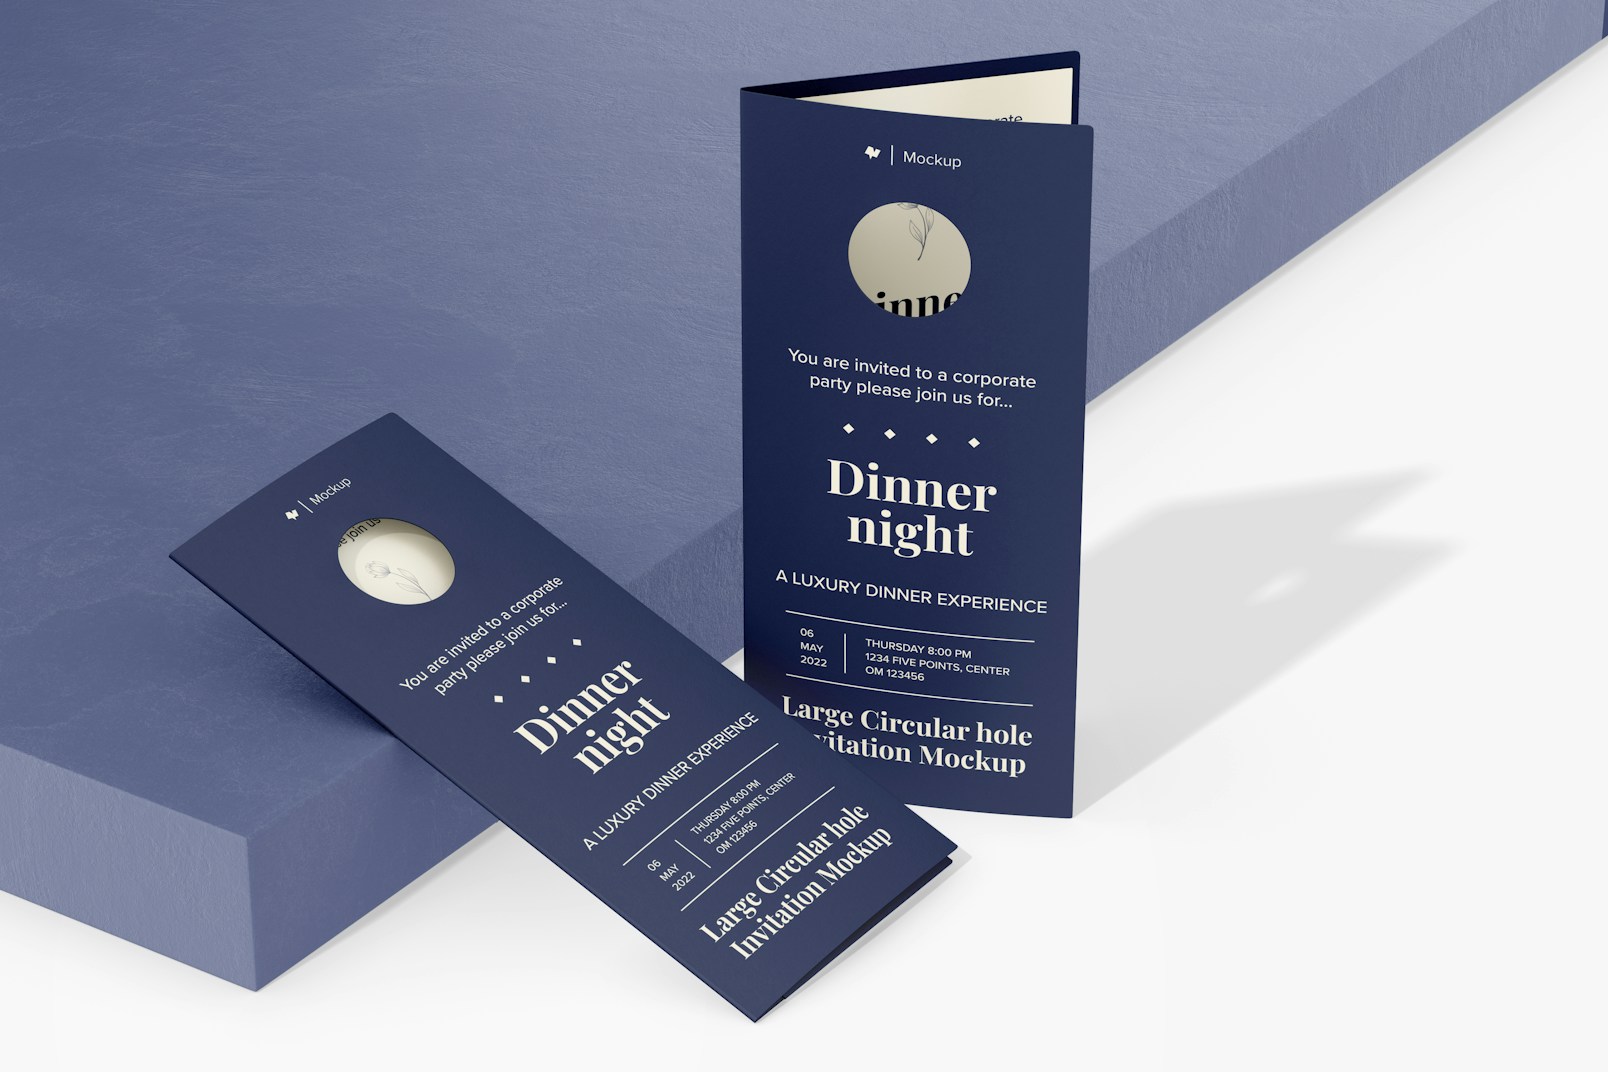 Large Circular Hole Invitation Mockup, Standing and Dropped